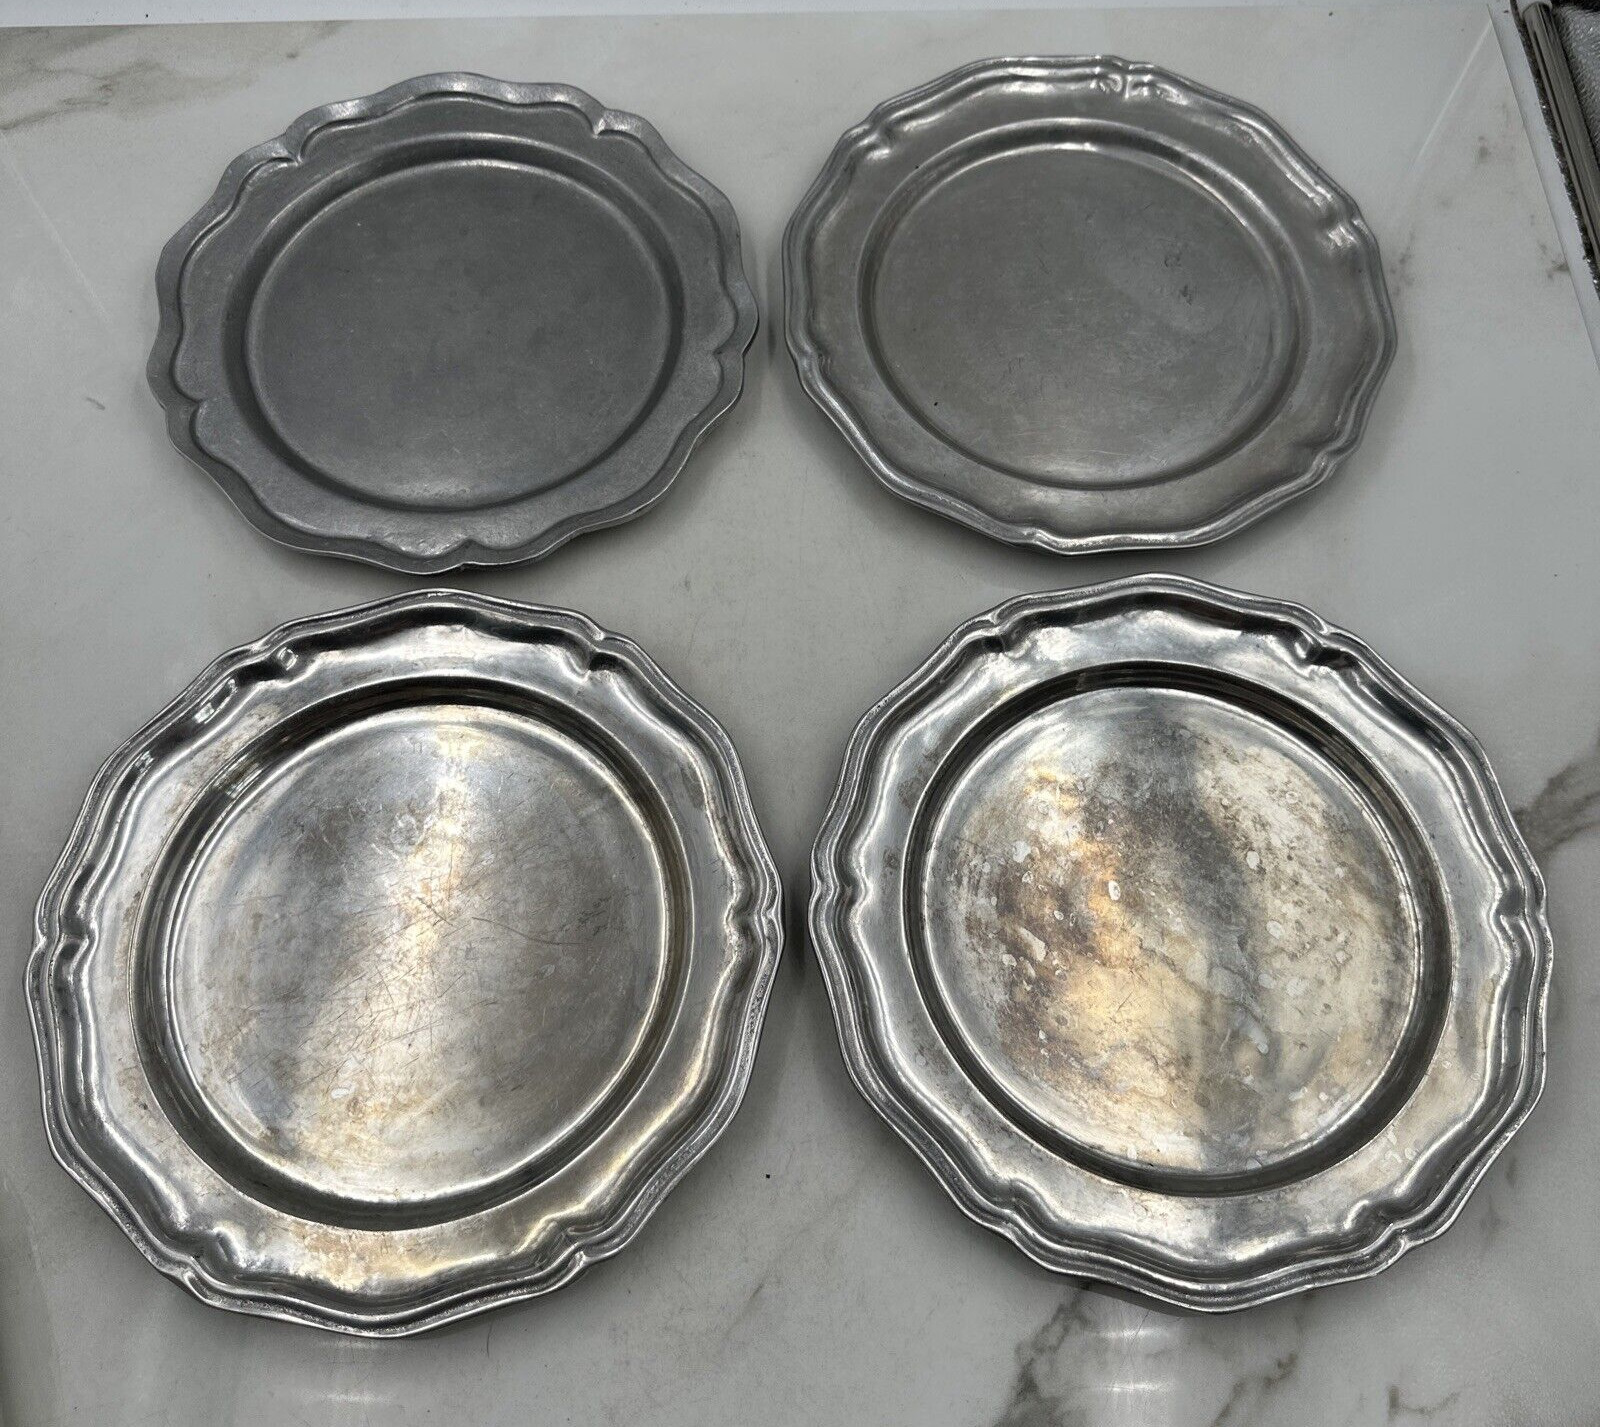 Wilton Armetale Pewter Queen Anne Pattern Dinner Plate Serving Plate Set of 4